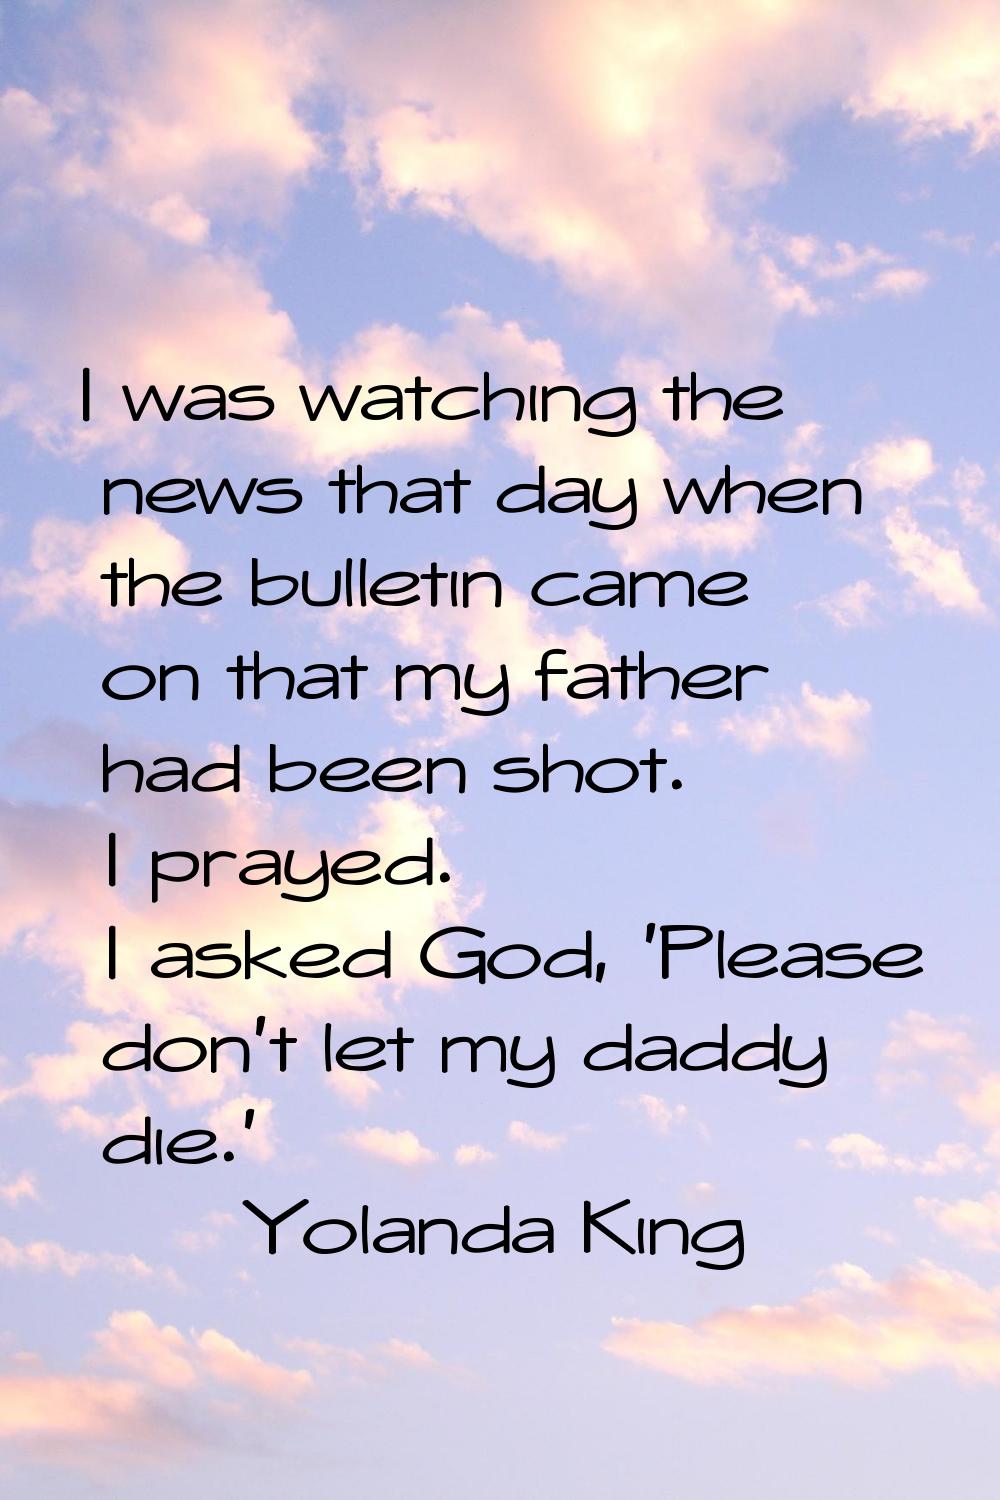 I was watching the news that day when the bulletin came on that my father had been shot. I prayed. 